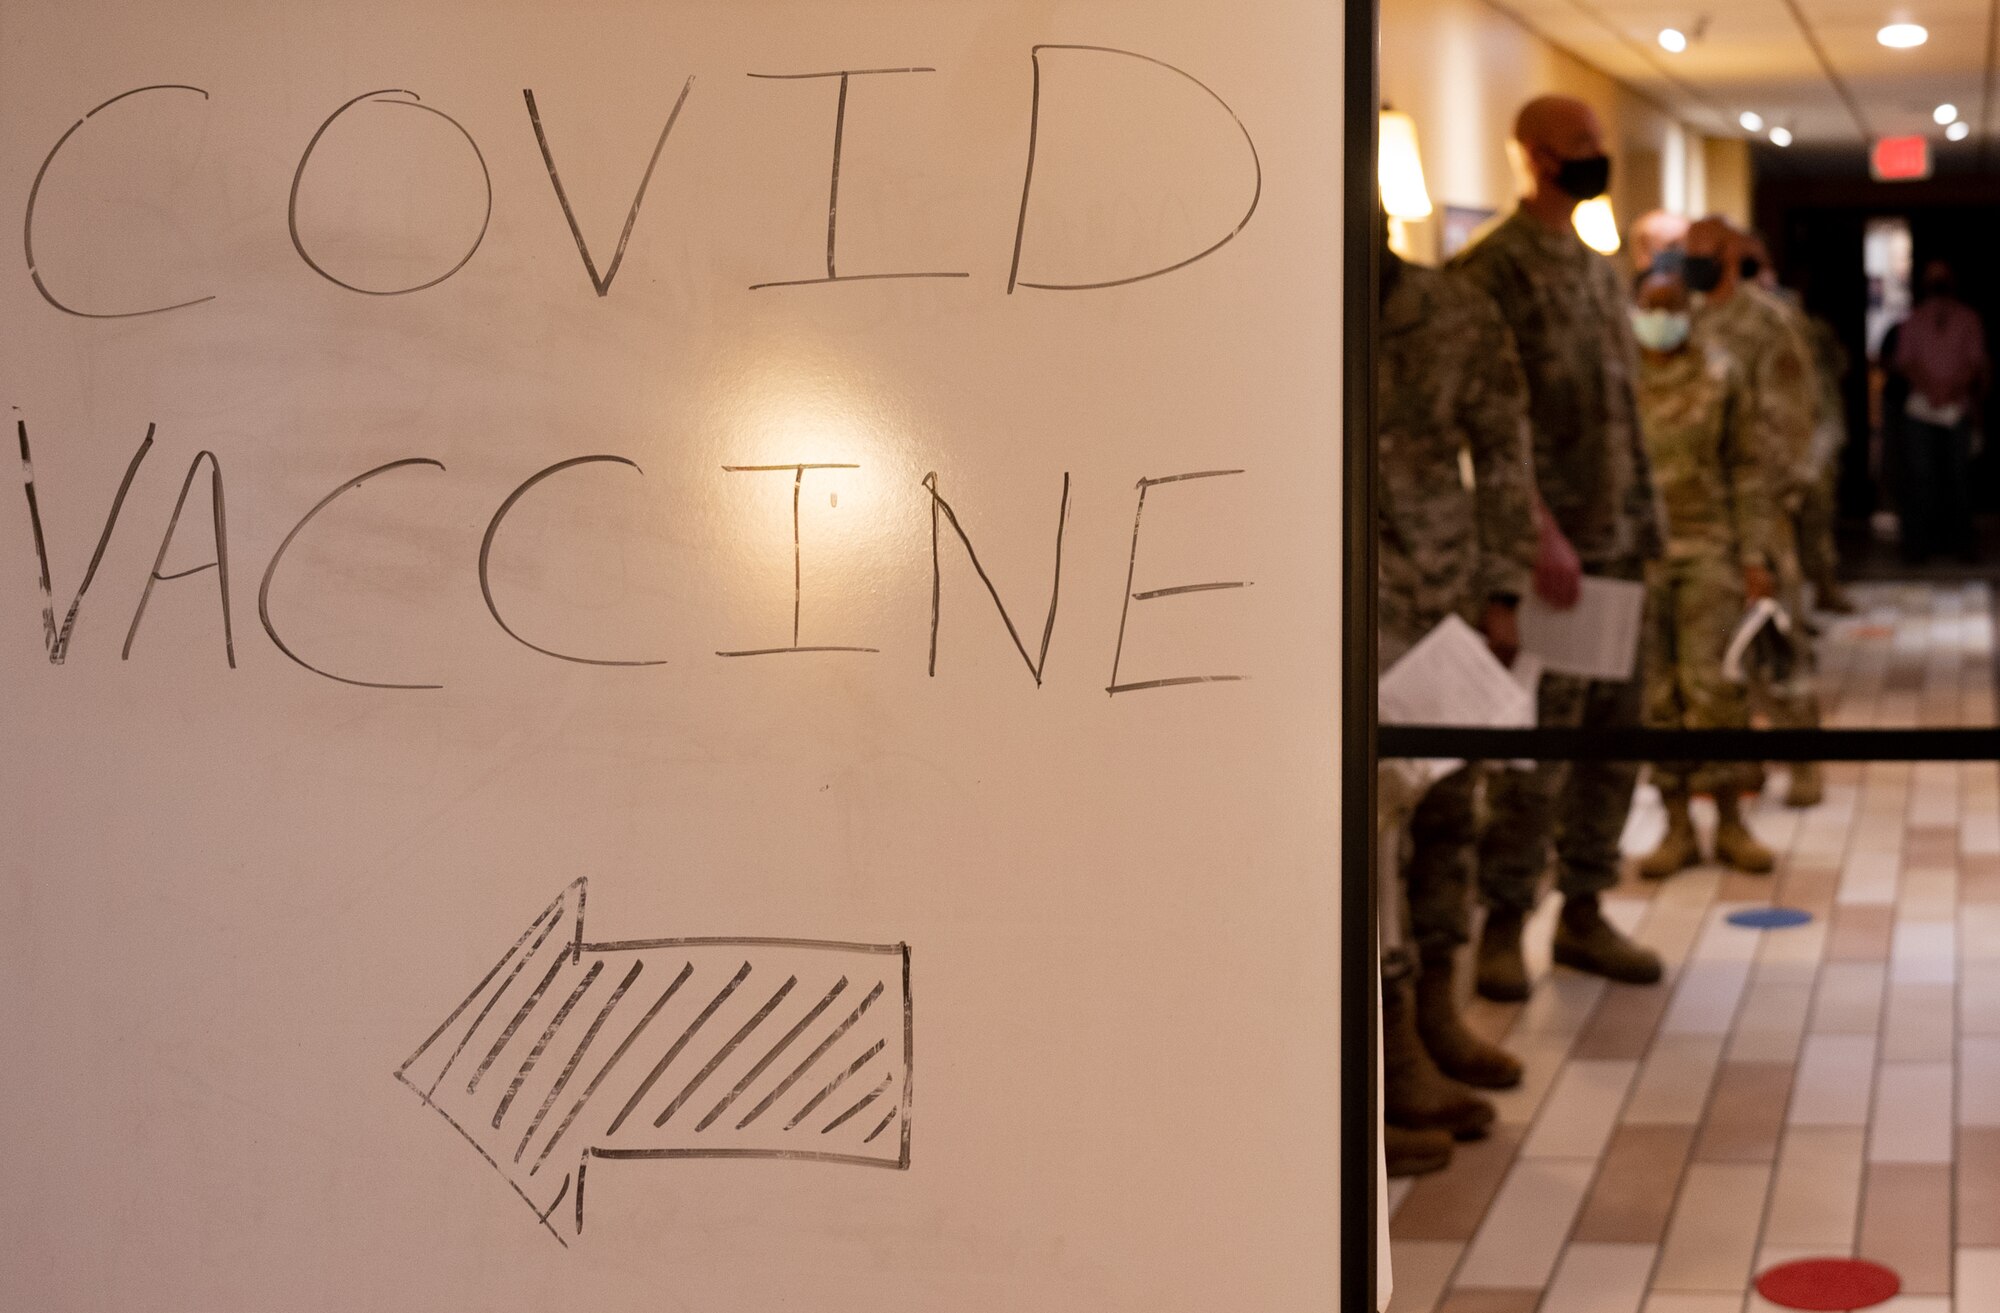 Vaccinations will help ensure service members’ health and safety while preserving the department’s readiness and ability to execute worldwide air and space forces missions, according to department leaders.